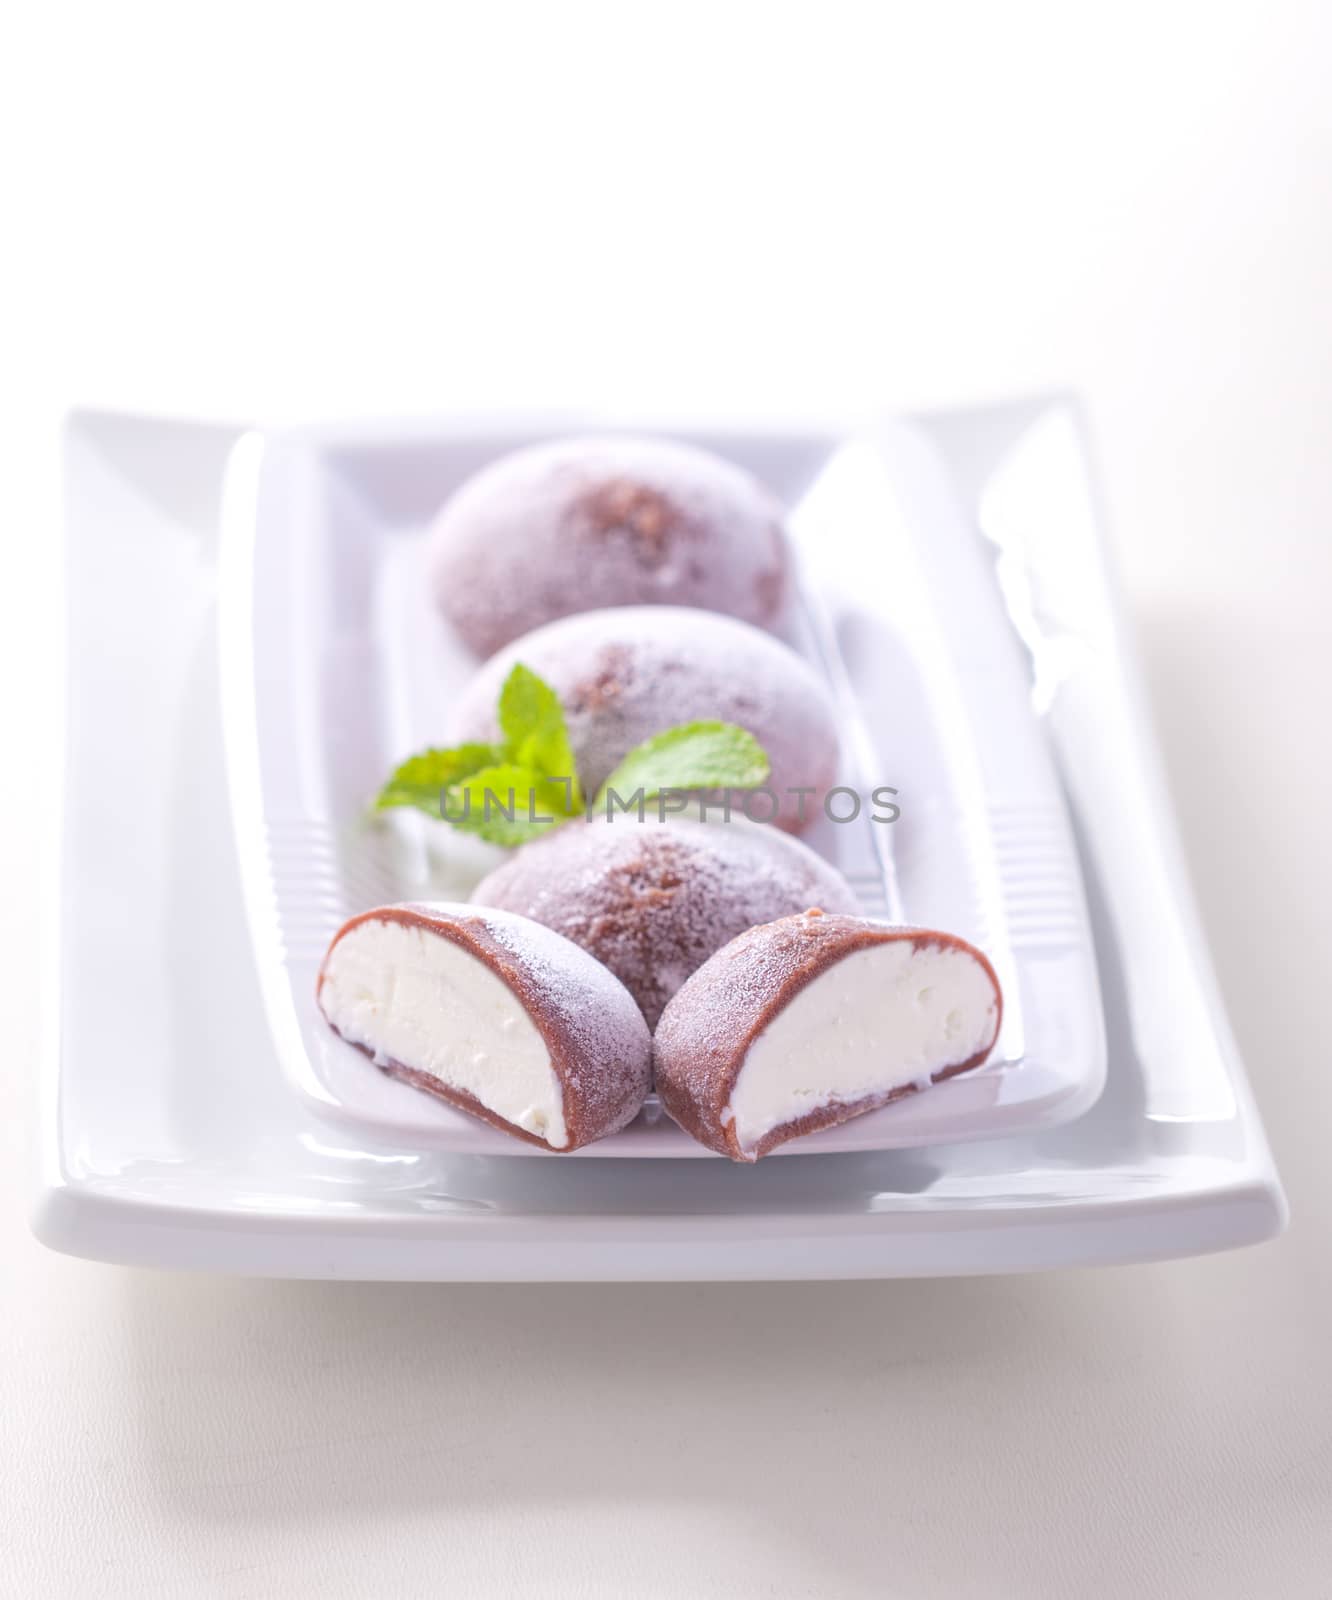 The colorful mochi dessert ice cream on wood plate by supercat67